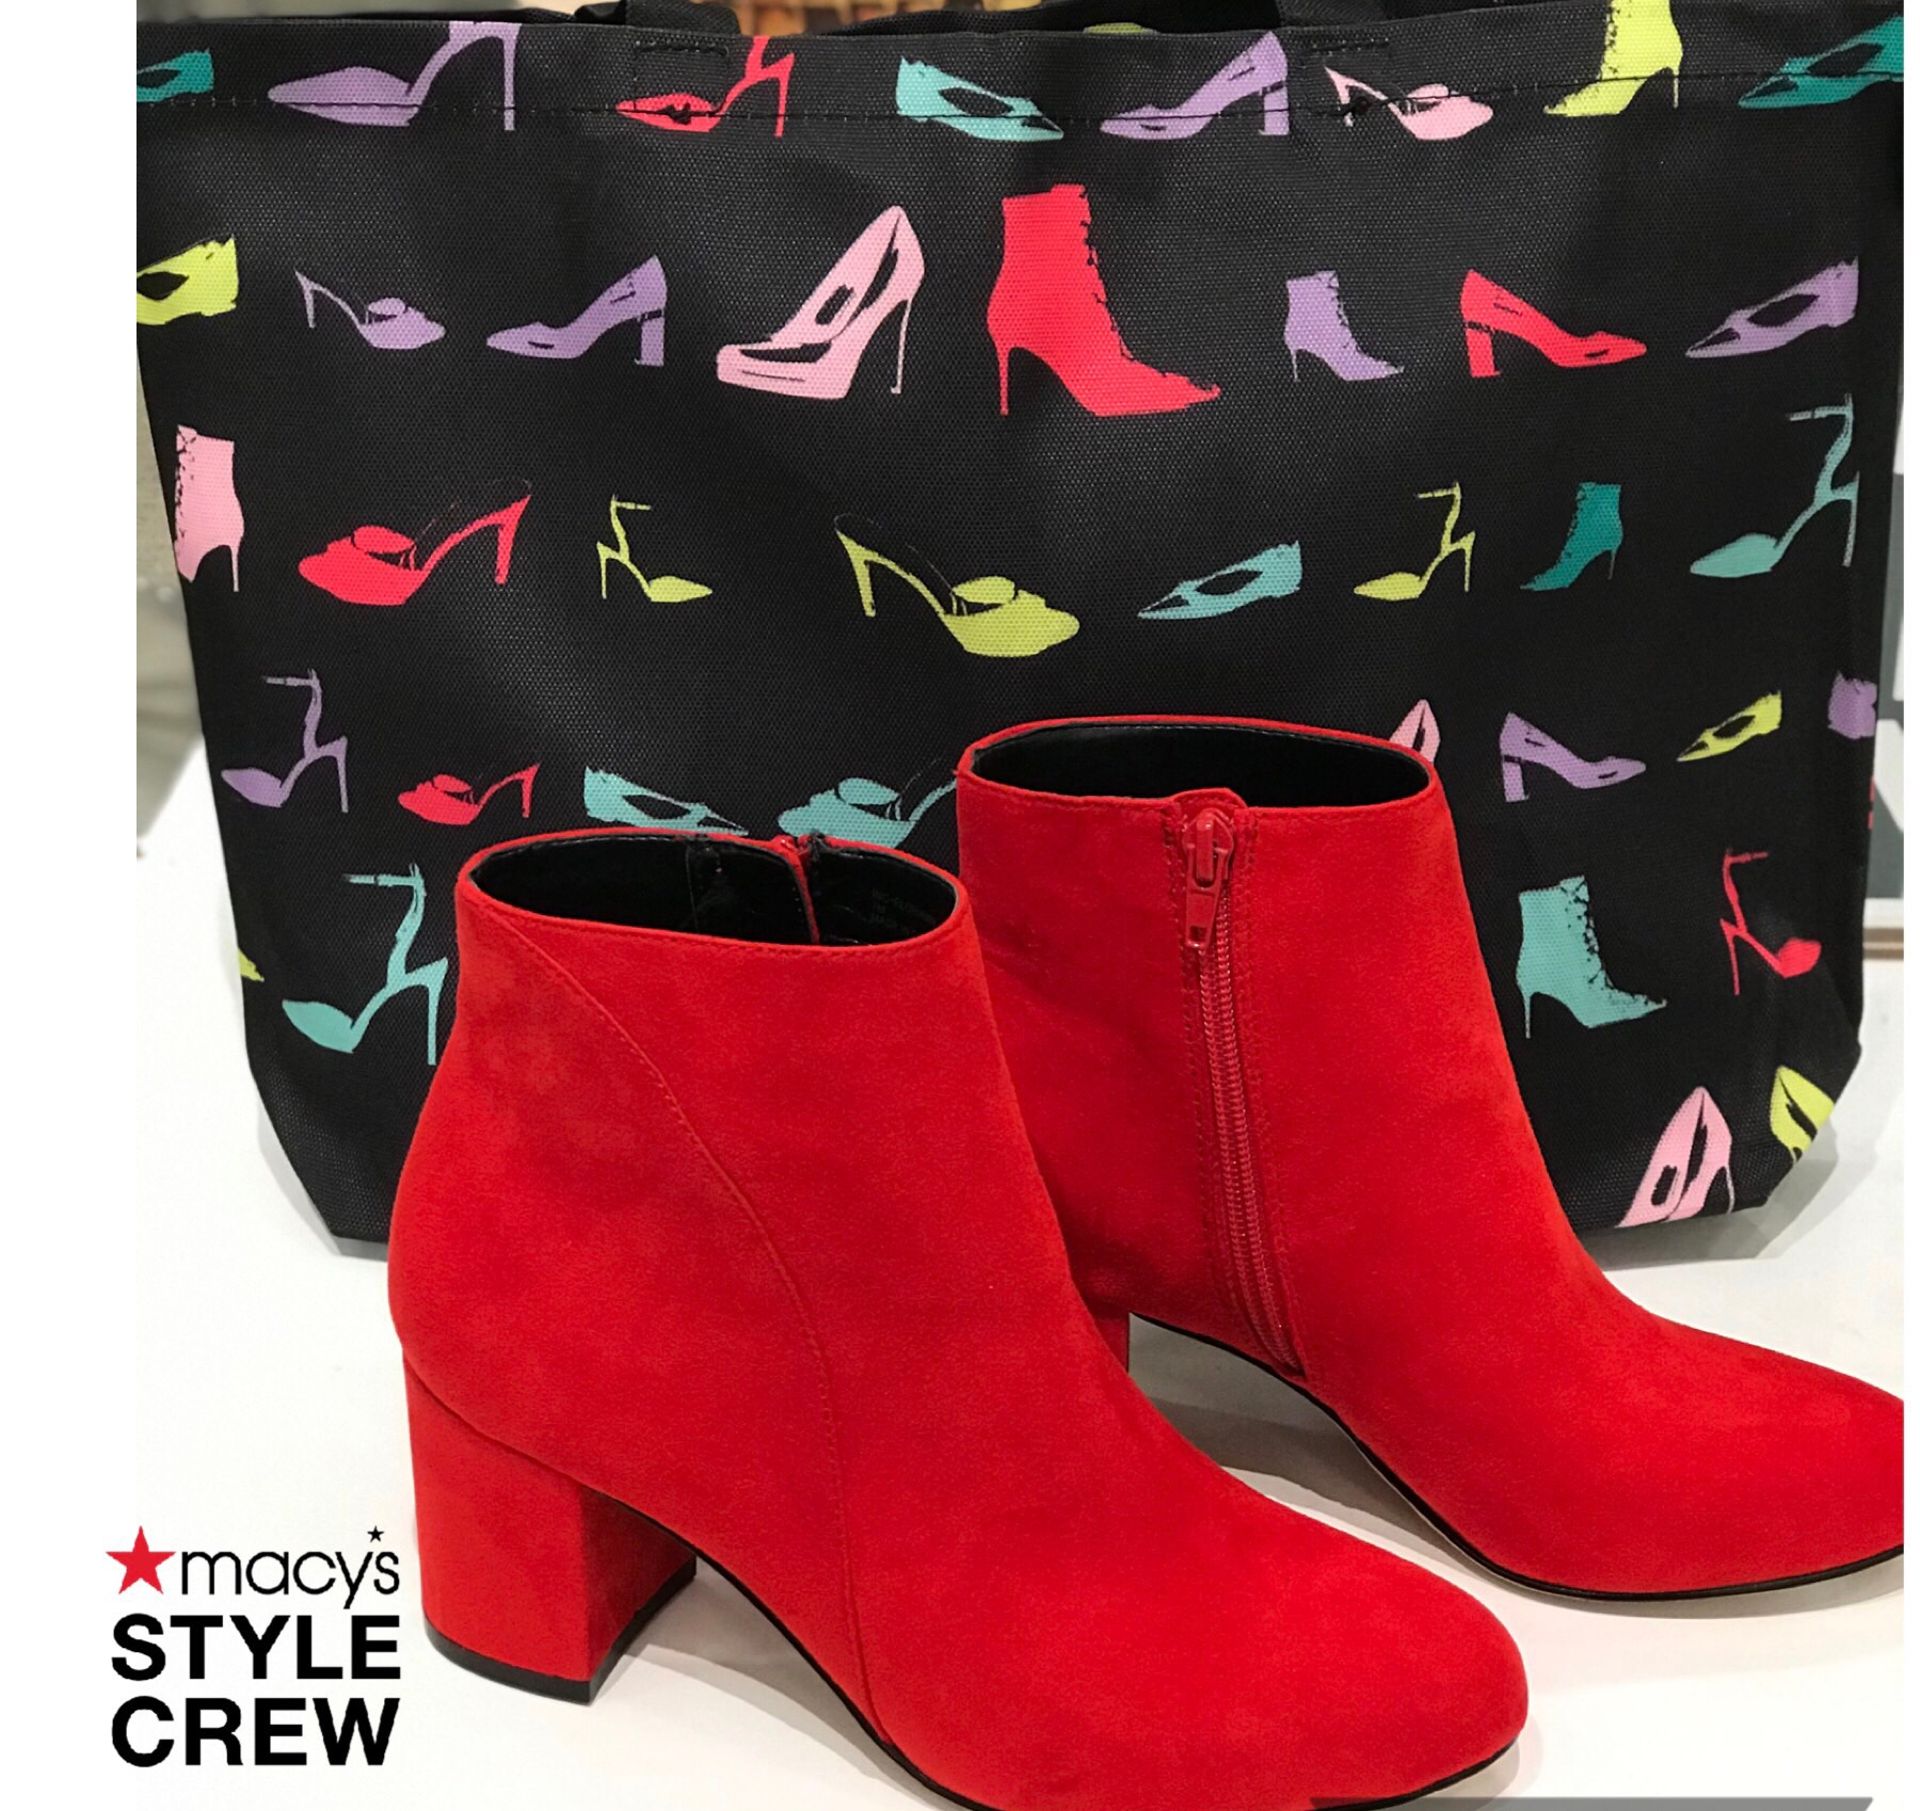 Red Boots - Macys Style Crew